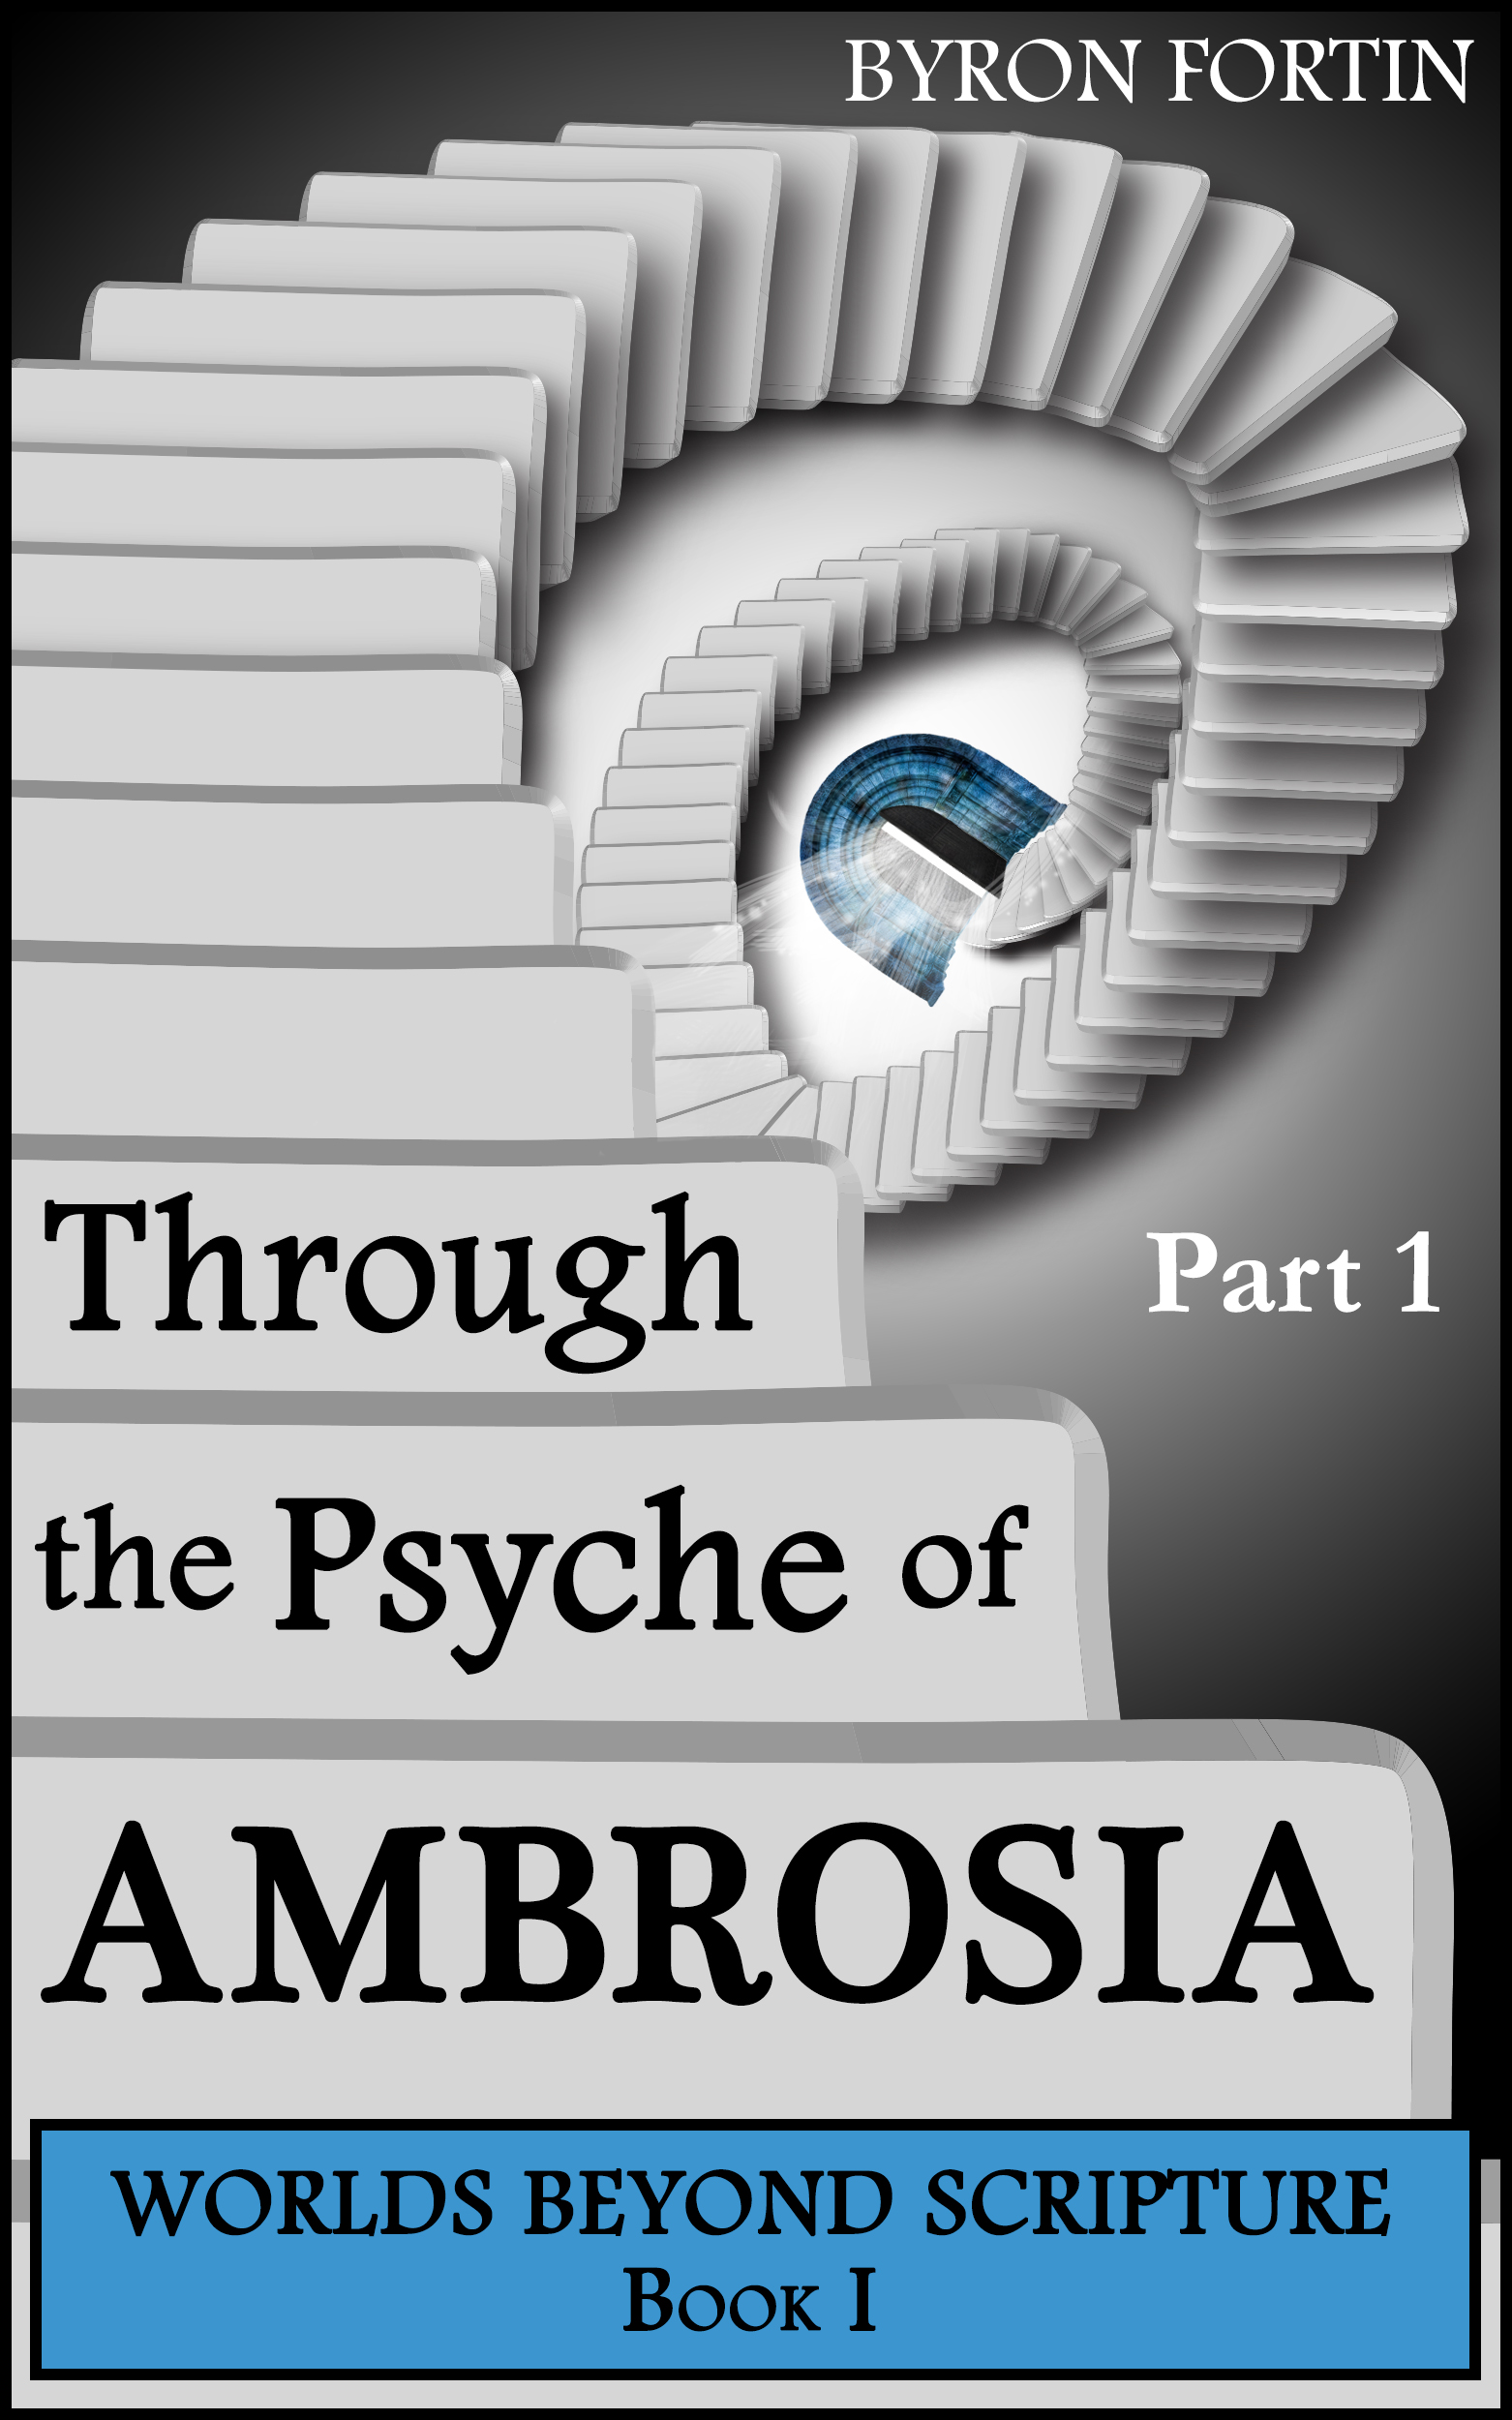 FREE: Through the Psyche of Ambrosia: Part I (Worlds Beyond Scripture Book 1) by Byron Fortin